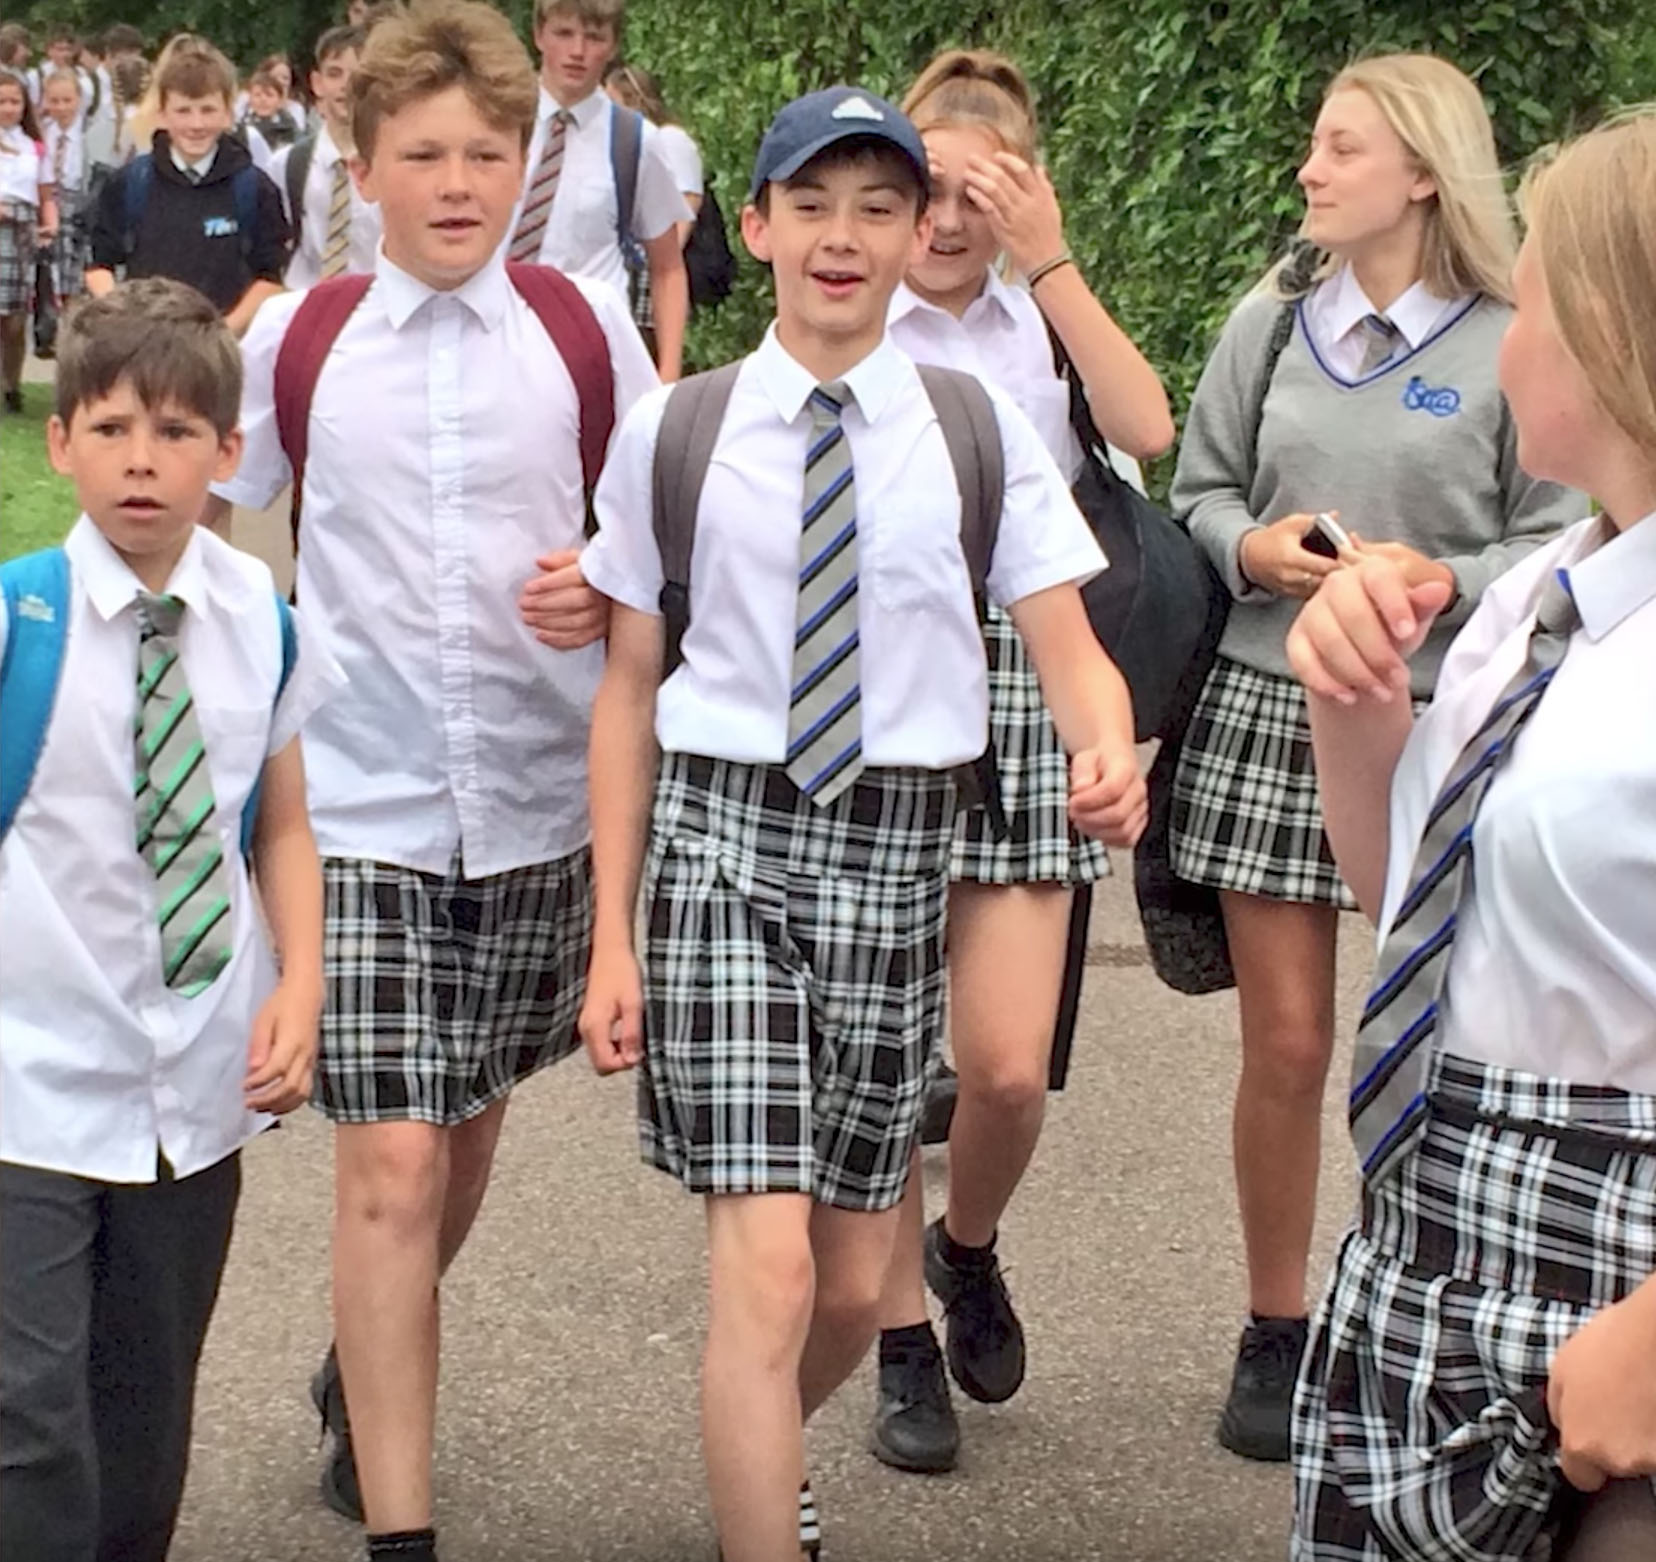 Male students at the Isca Academy in Exeter, England, wear skirts in protest of the school's shorts ban on June 22, 2017. (Youtube)